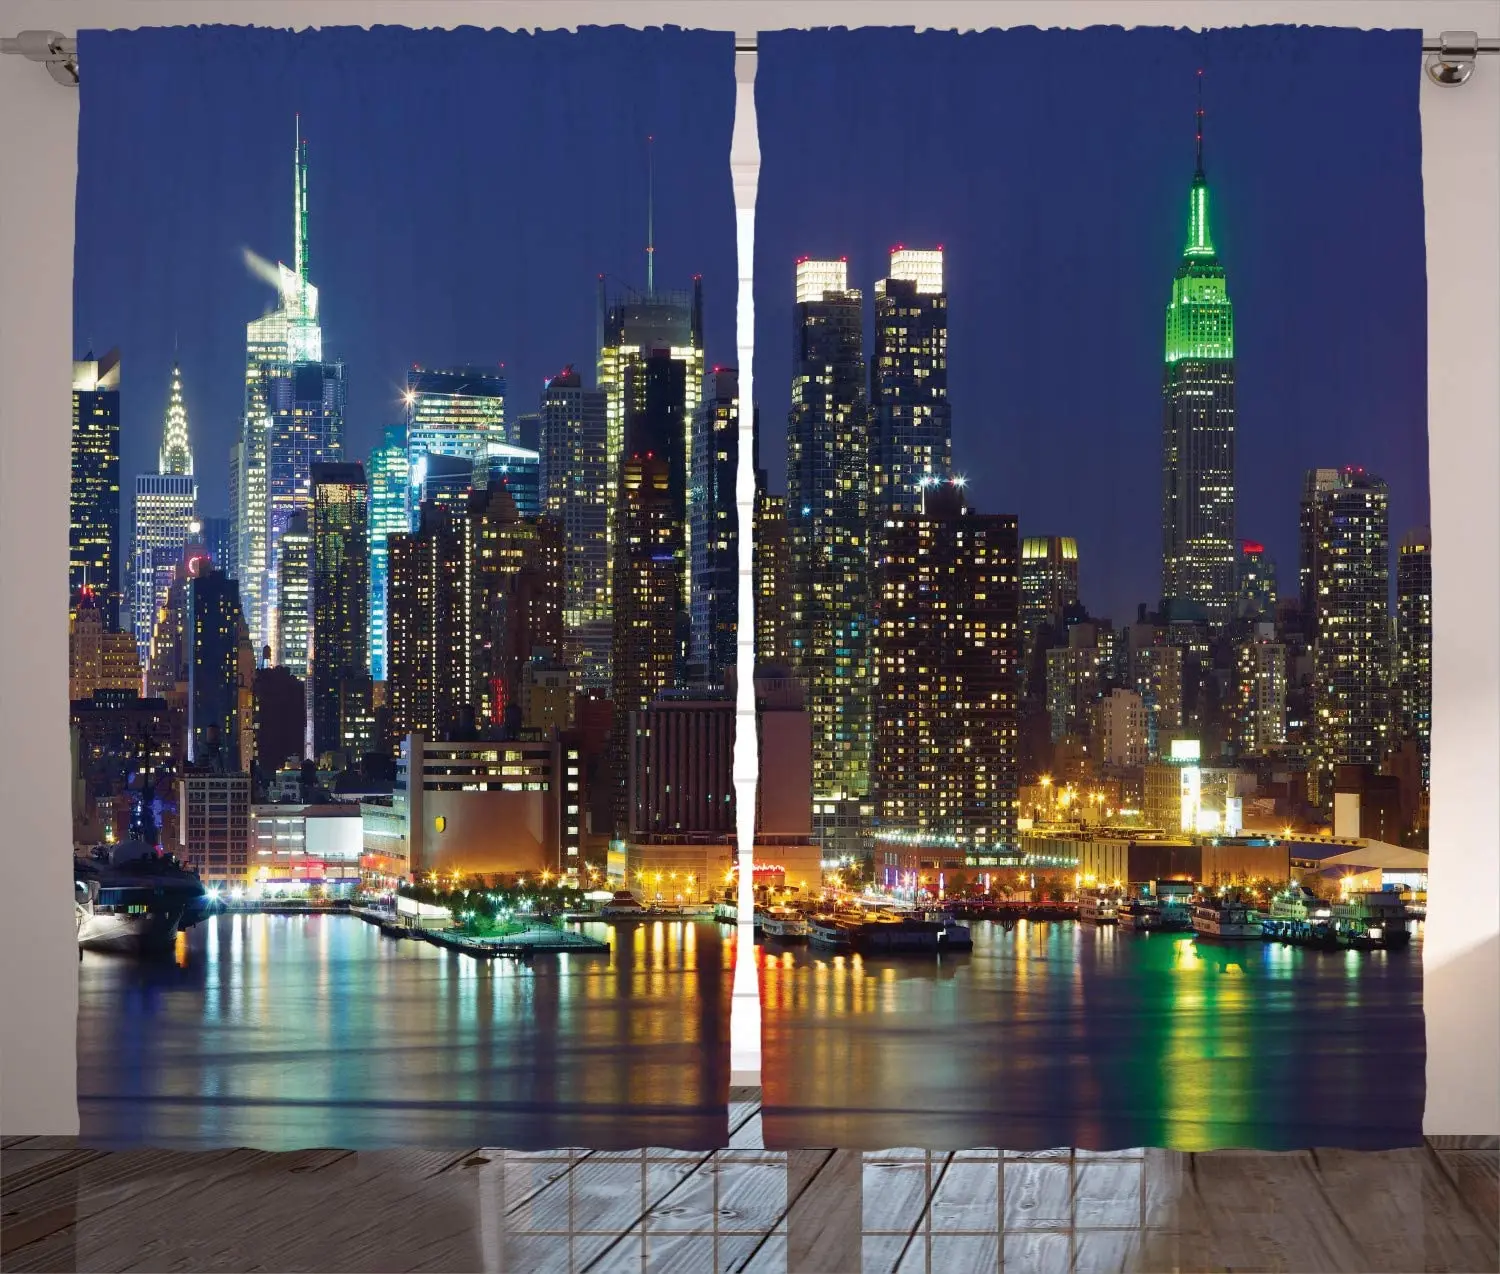 

New York Curtains NYC Midtown Skyline in Evening Skyscrapers Metropolis City States Photo Living Room Bedroom Window Drapes